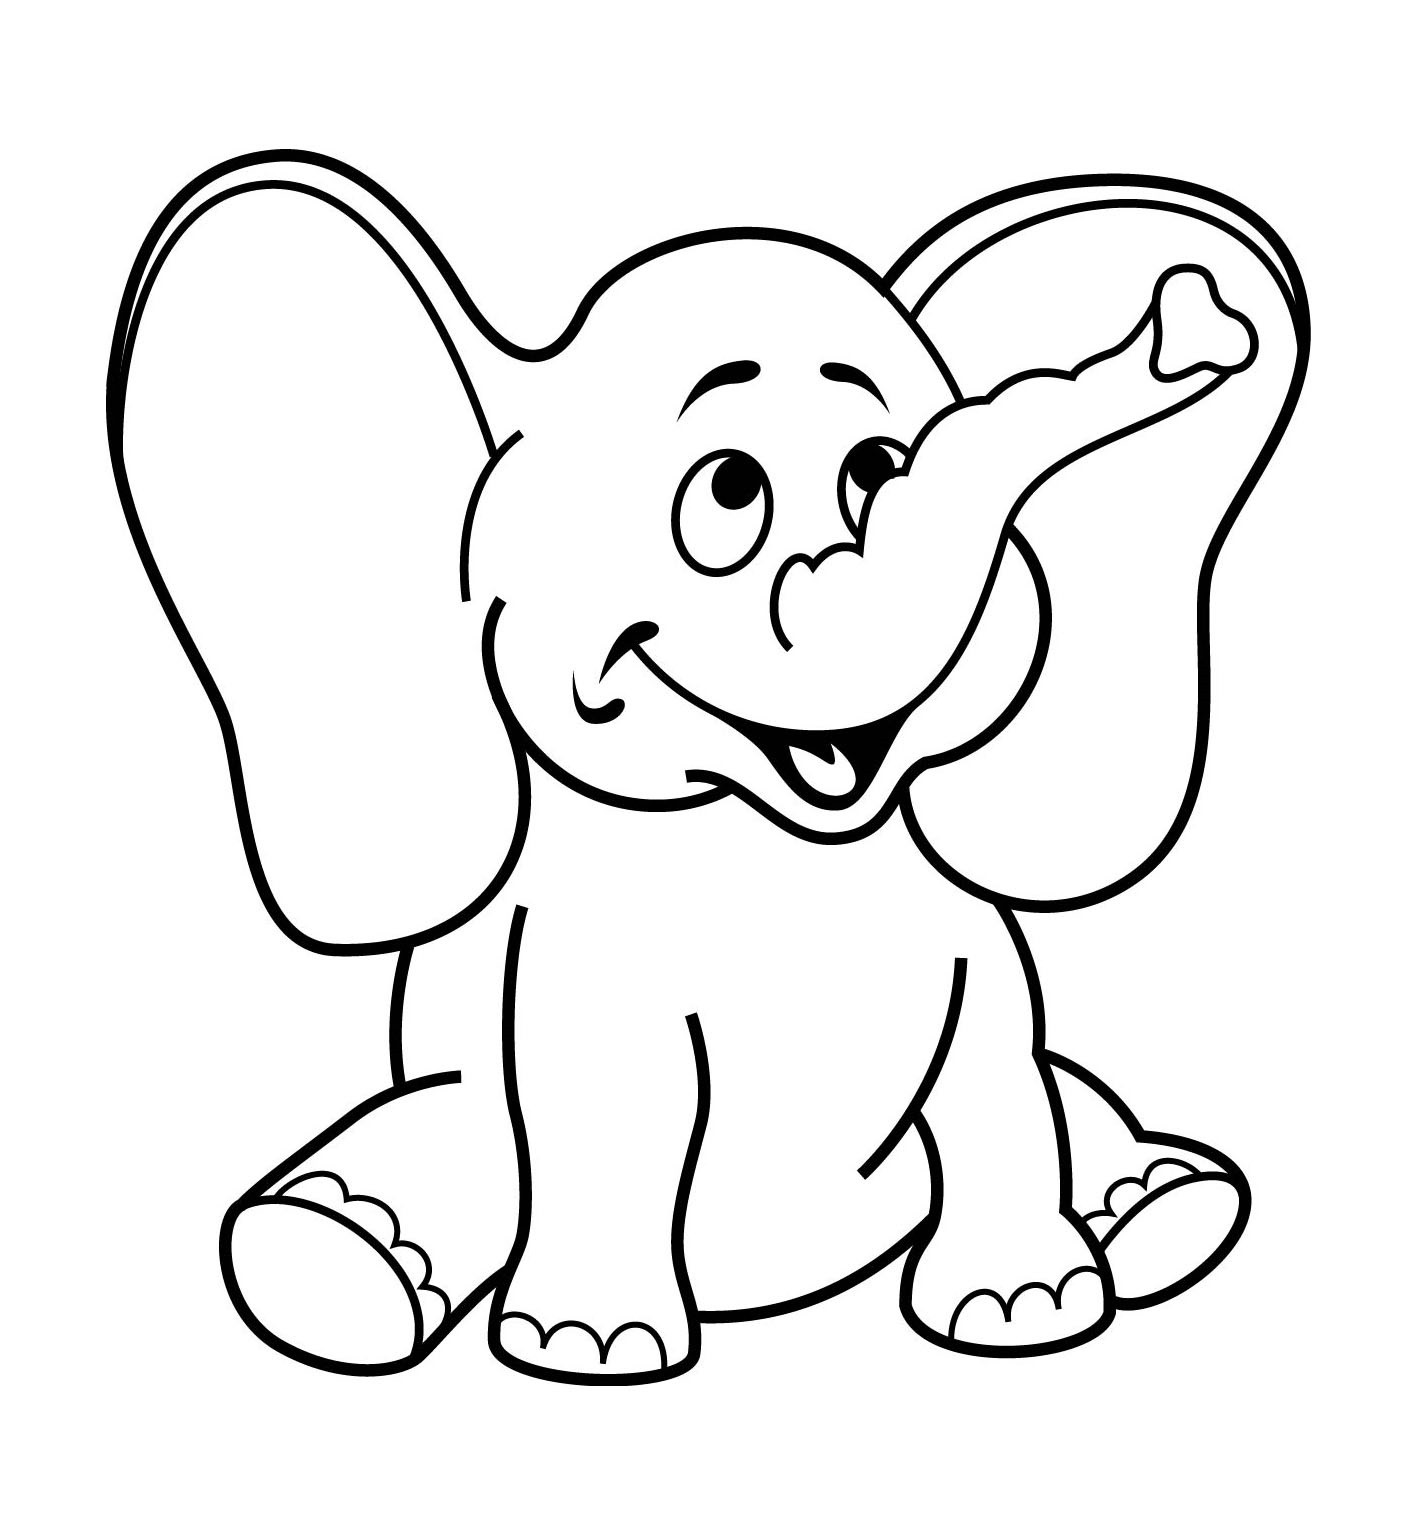 Coloring Pages For 13 Year Olds at GetColorings.com | Free printable